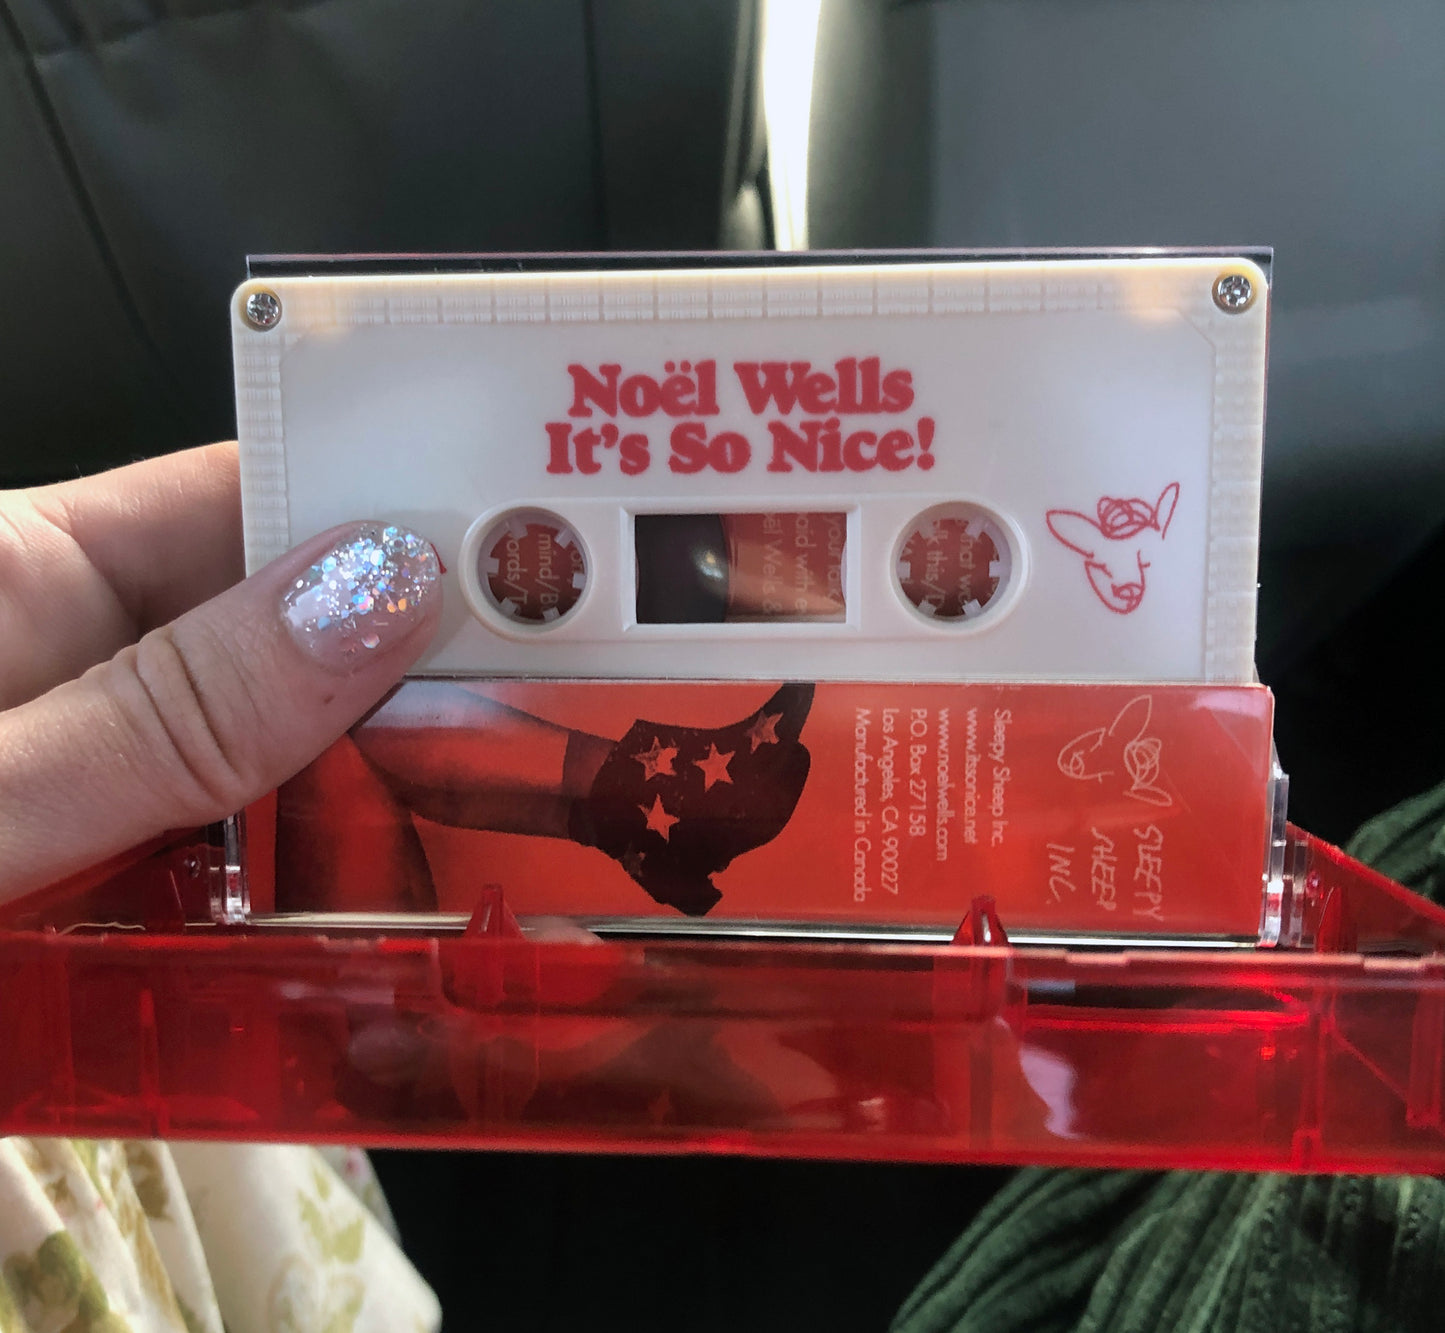 Limited Edition "It's So Nice!" Cassette Tape